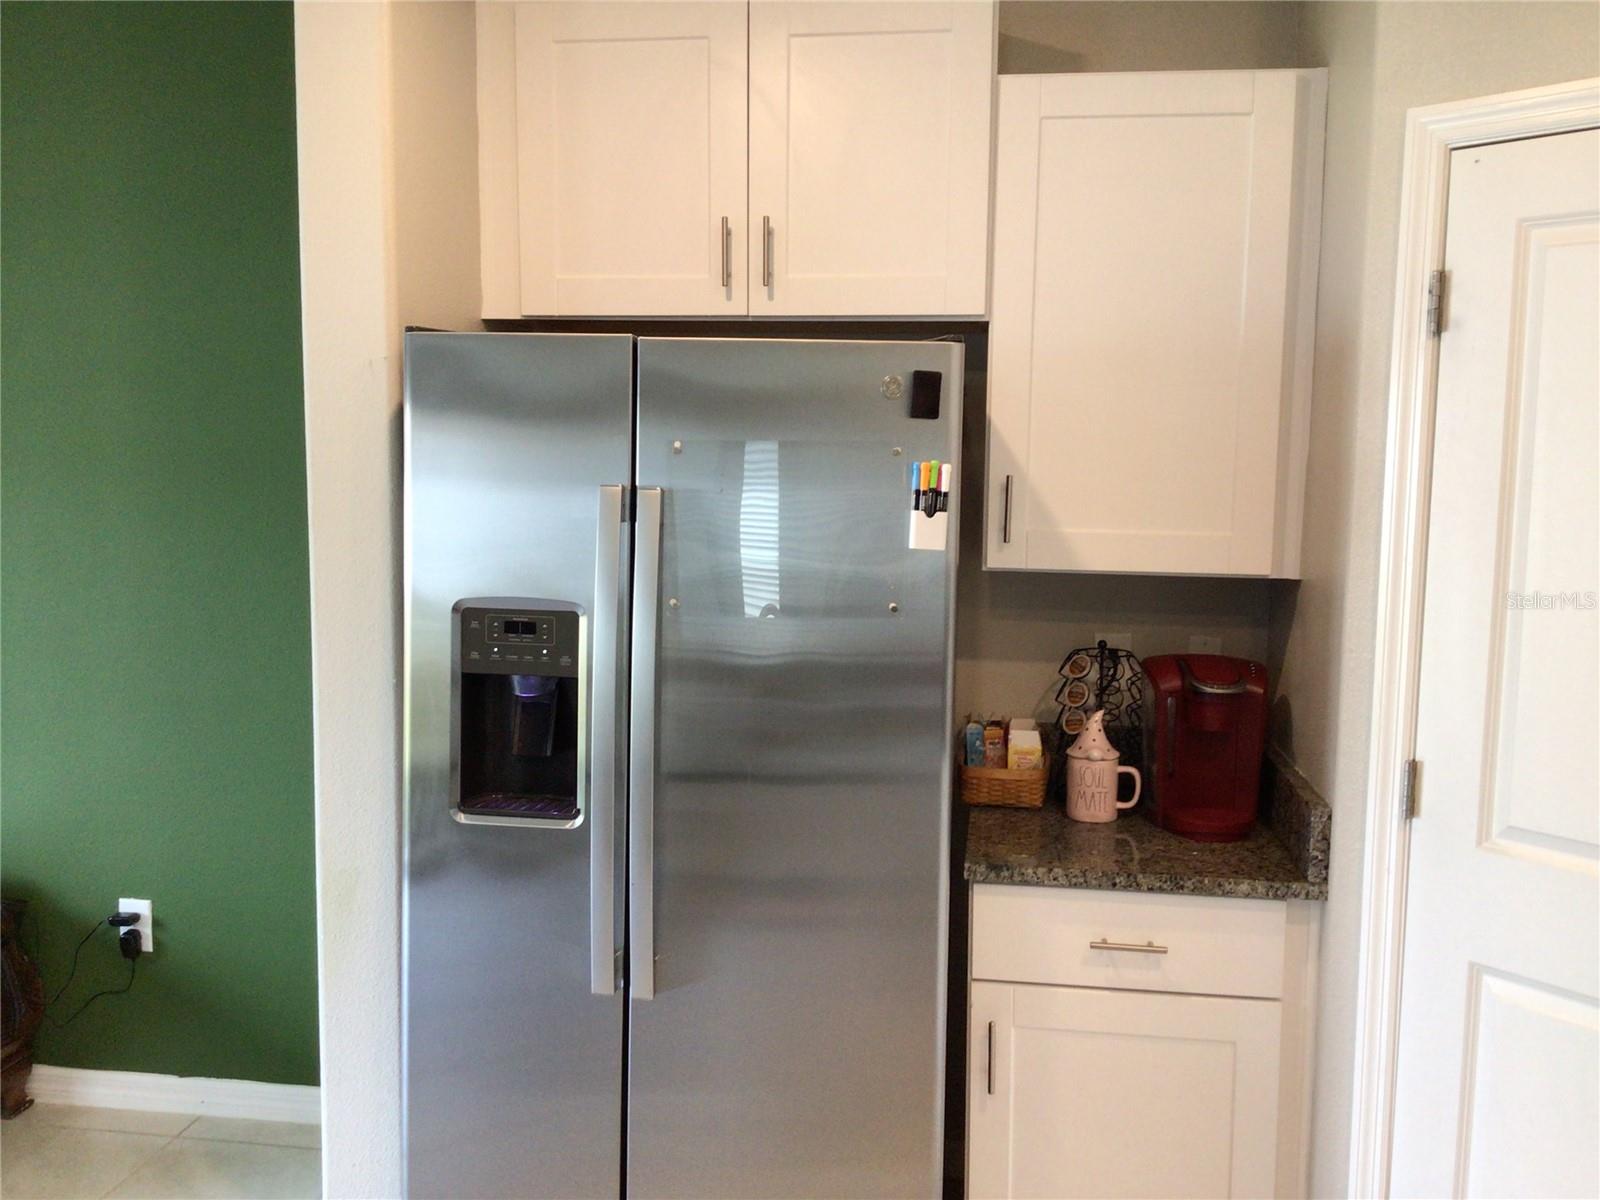 Stainless Refrigerator and Coffee Bar